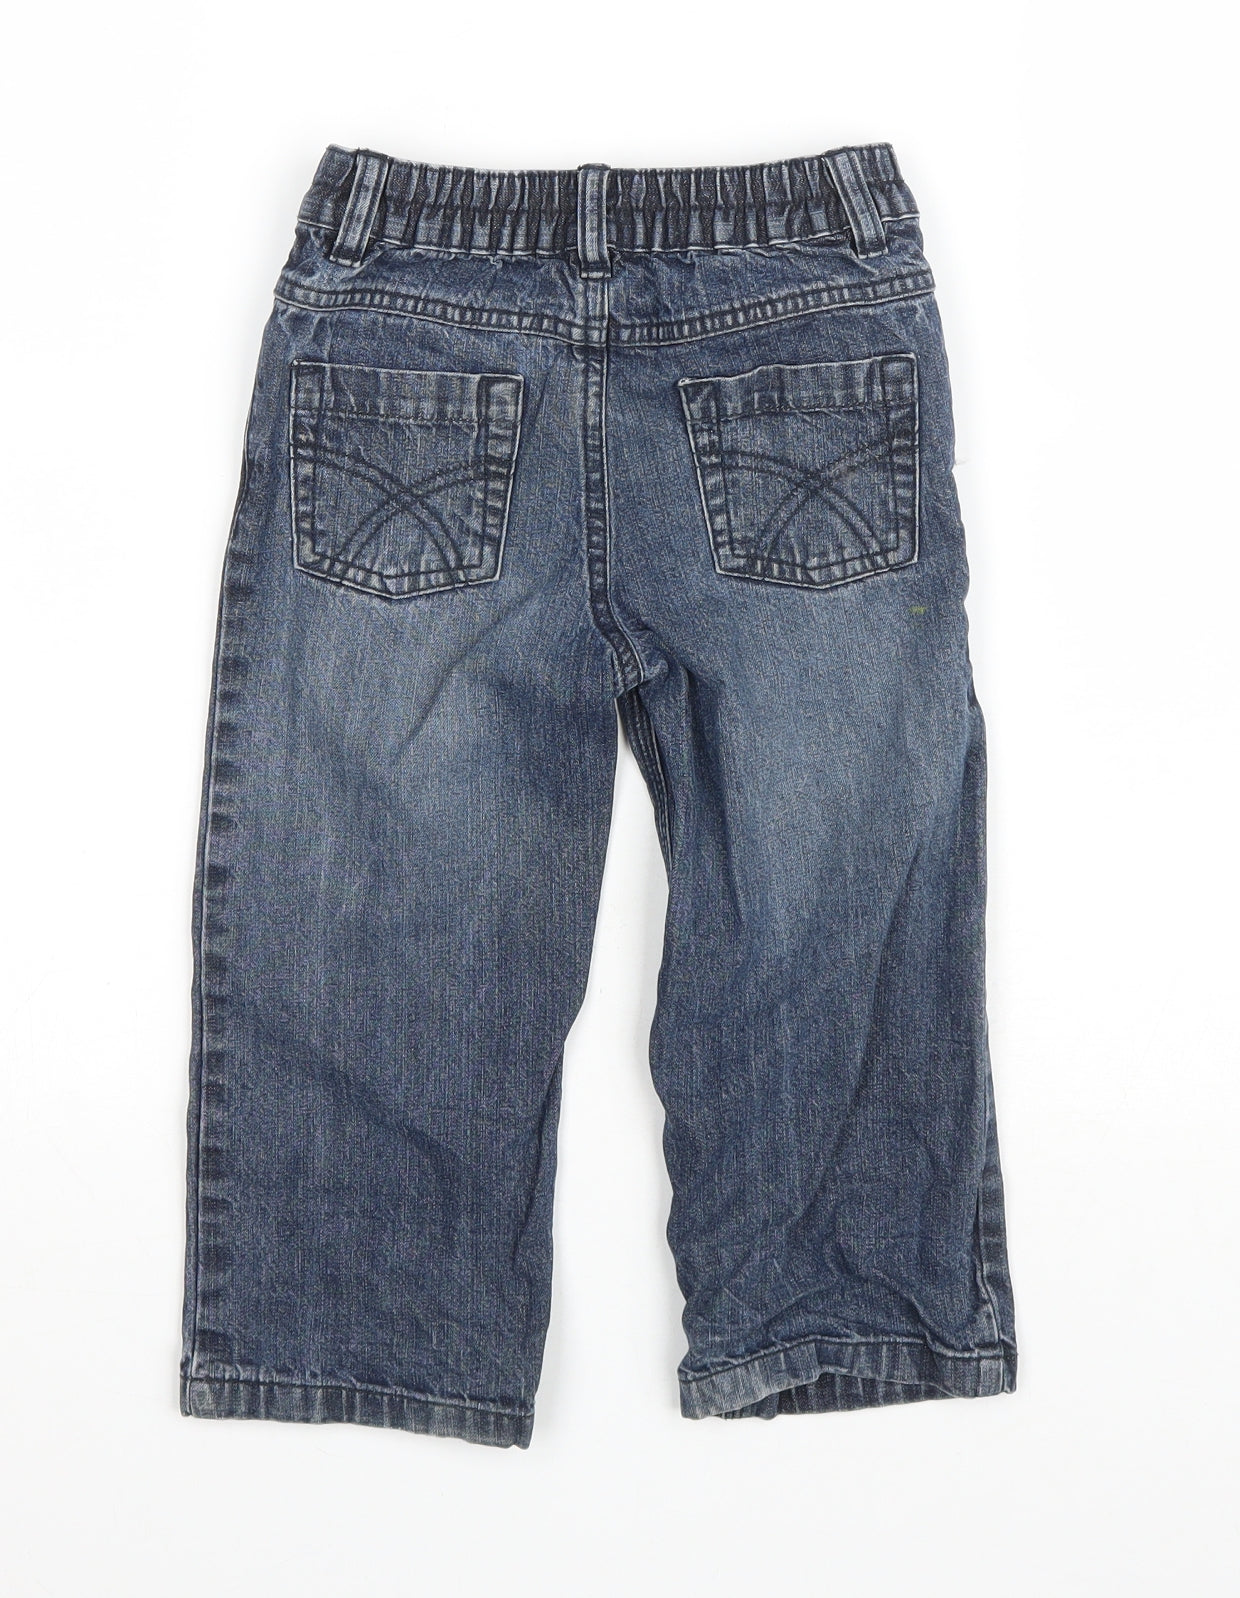 F&F Boys Blue Cotton Straight Jeans Size 3-4 Years Regular Button